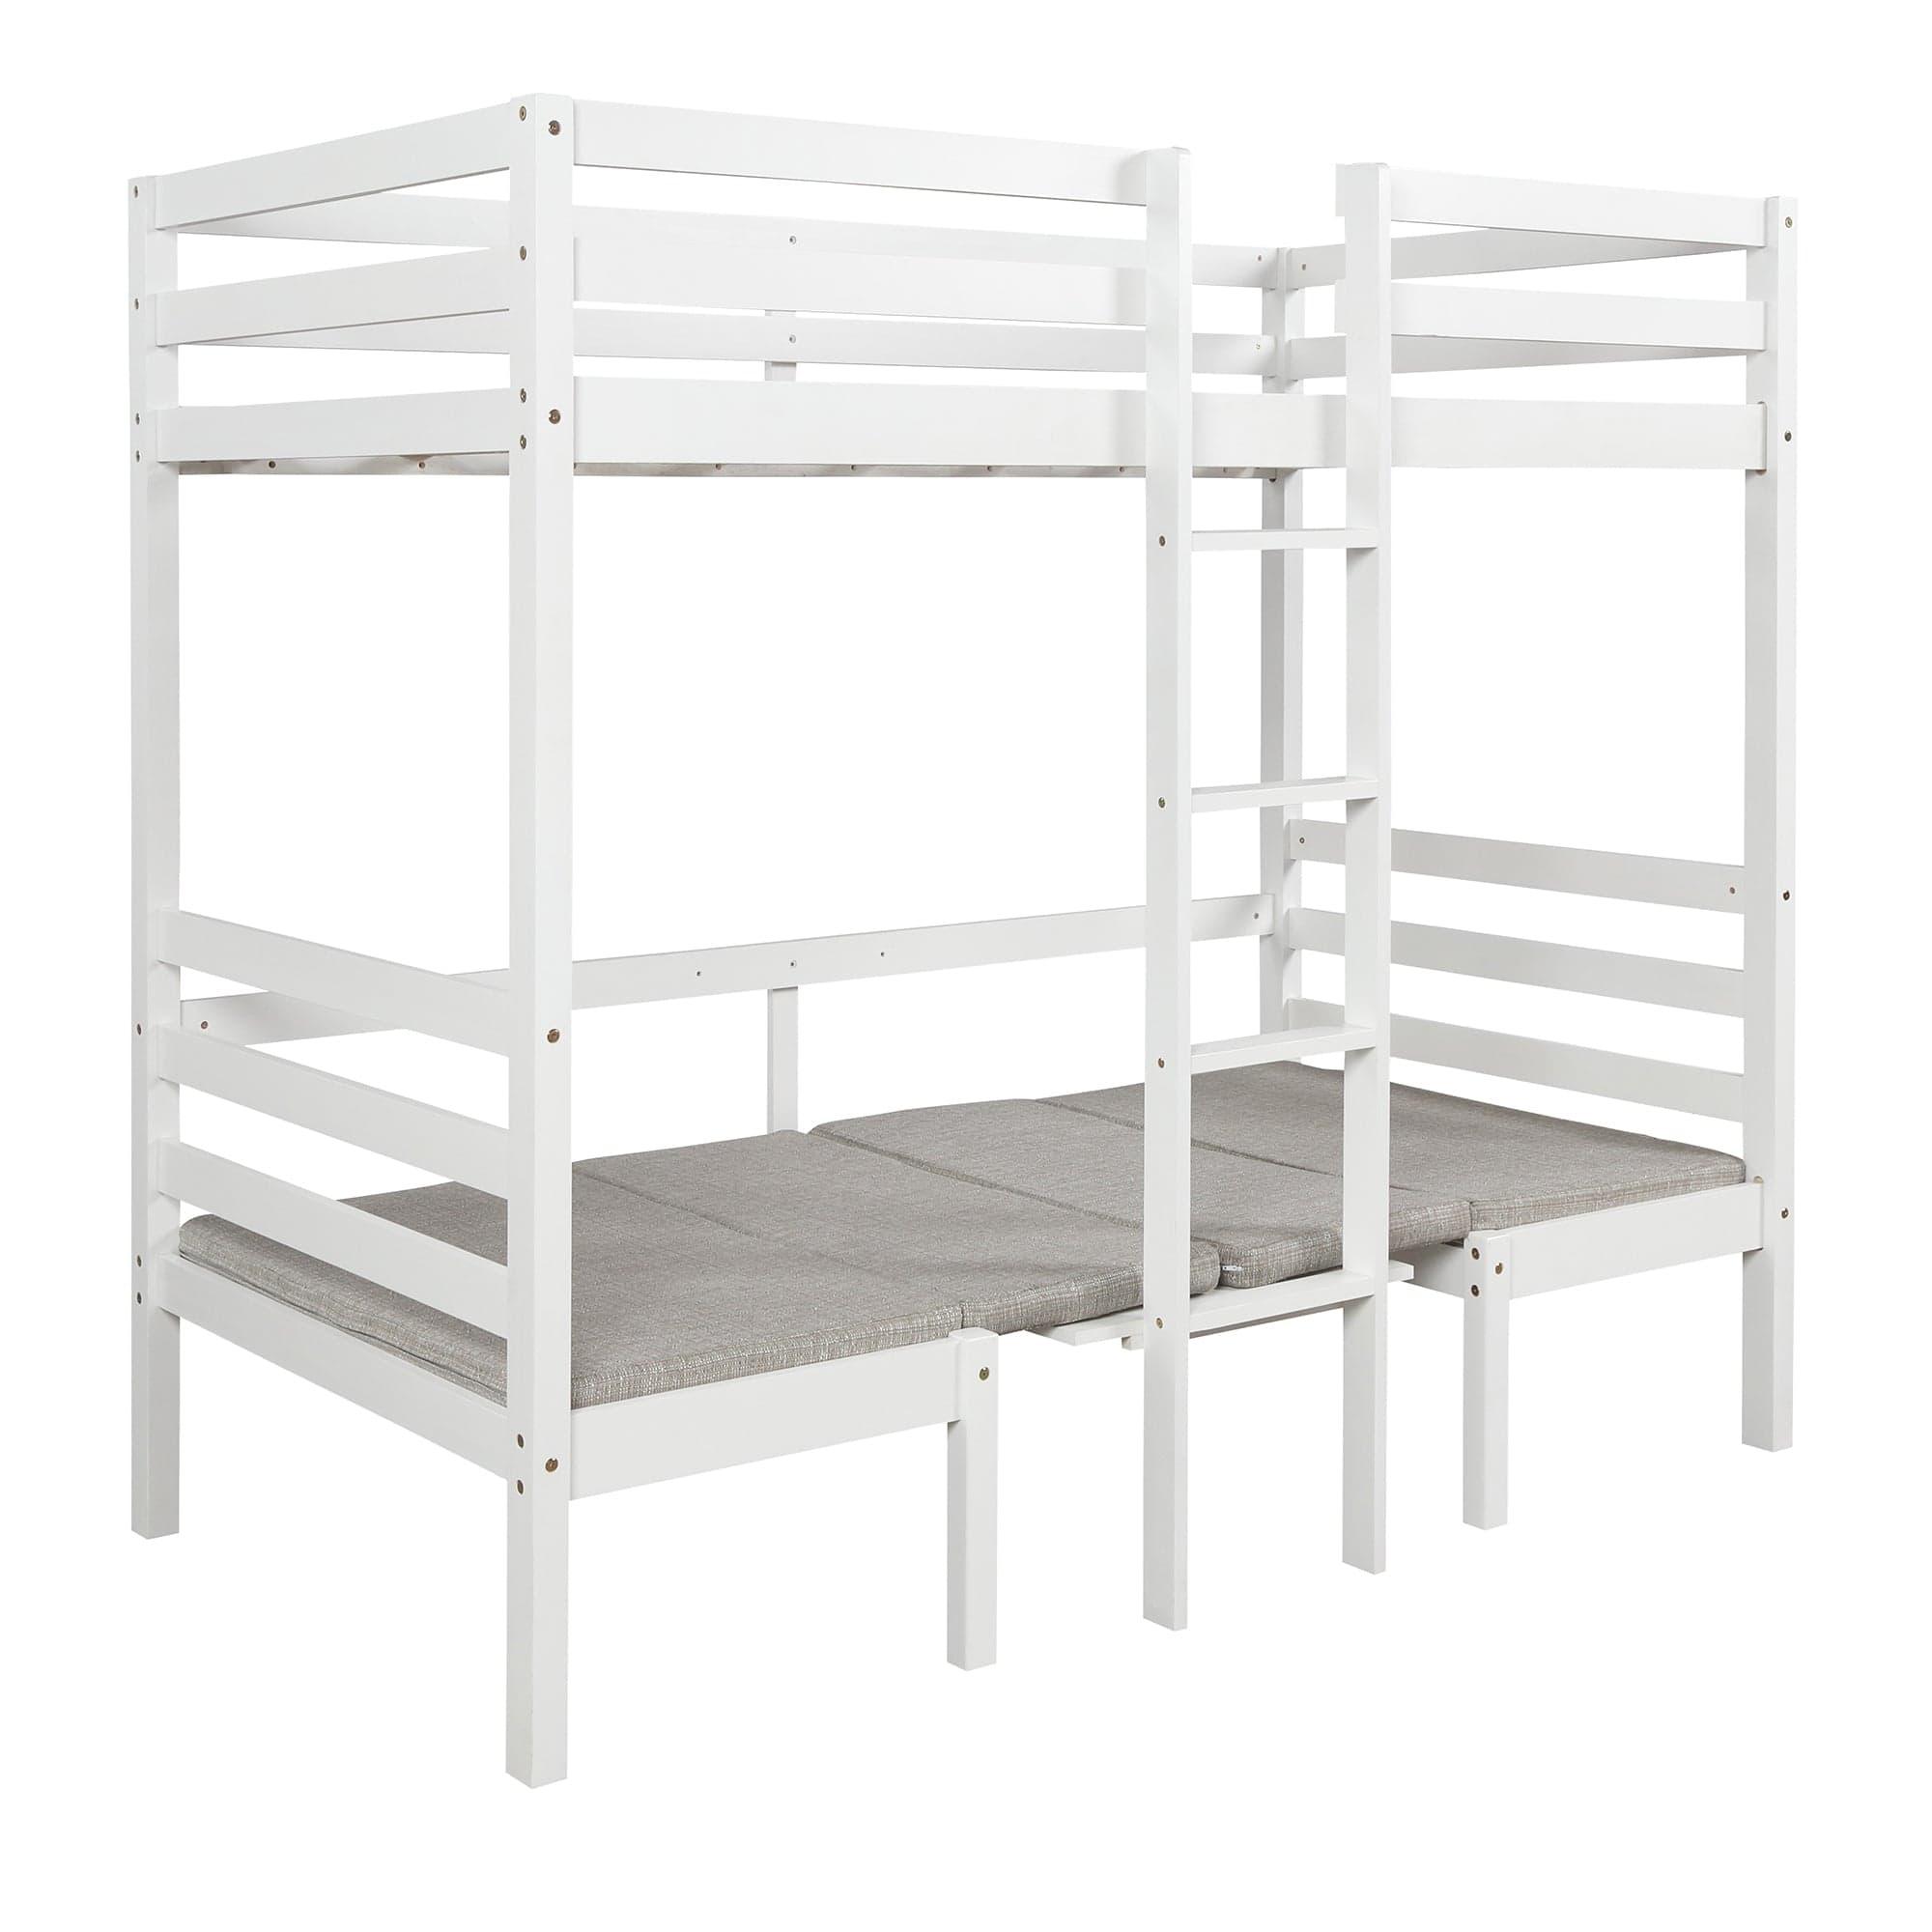 Shop Functional Loft Bed (turn into upper bed and down desk，cushion sets are free),Twin Size,White Mademoiselle Home Decor